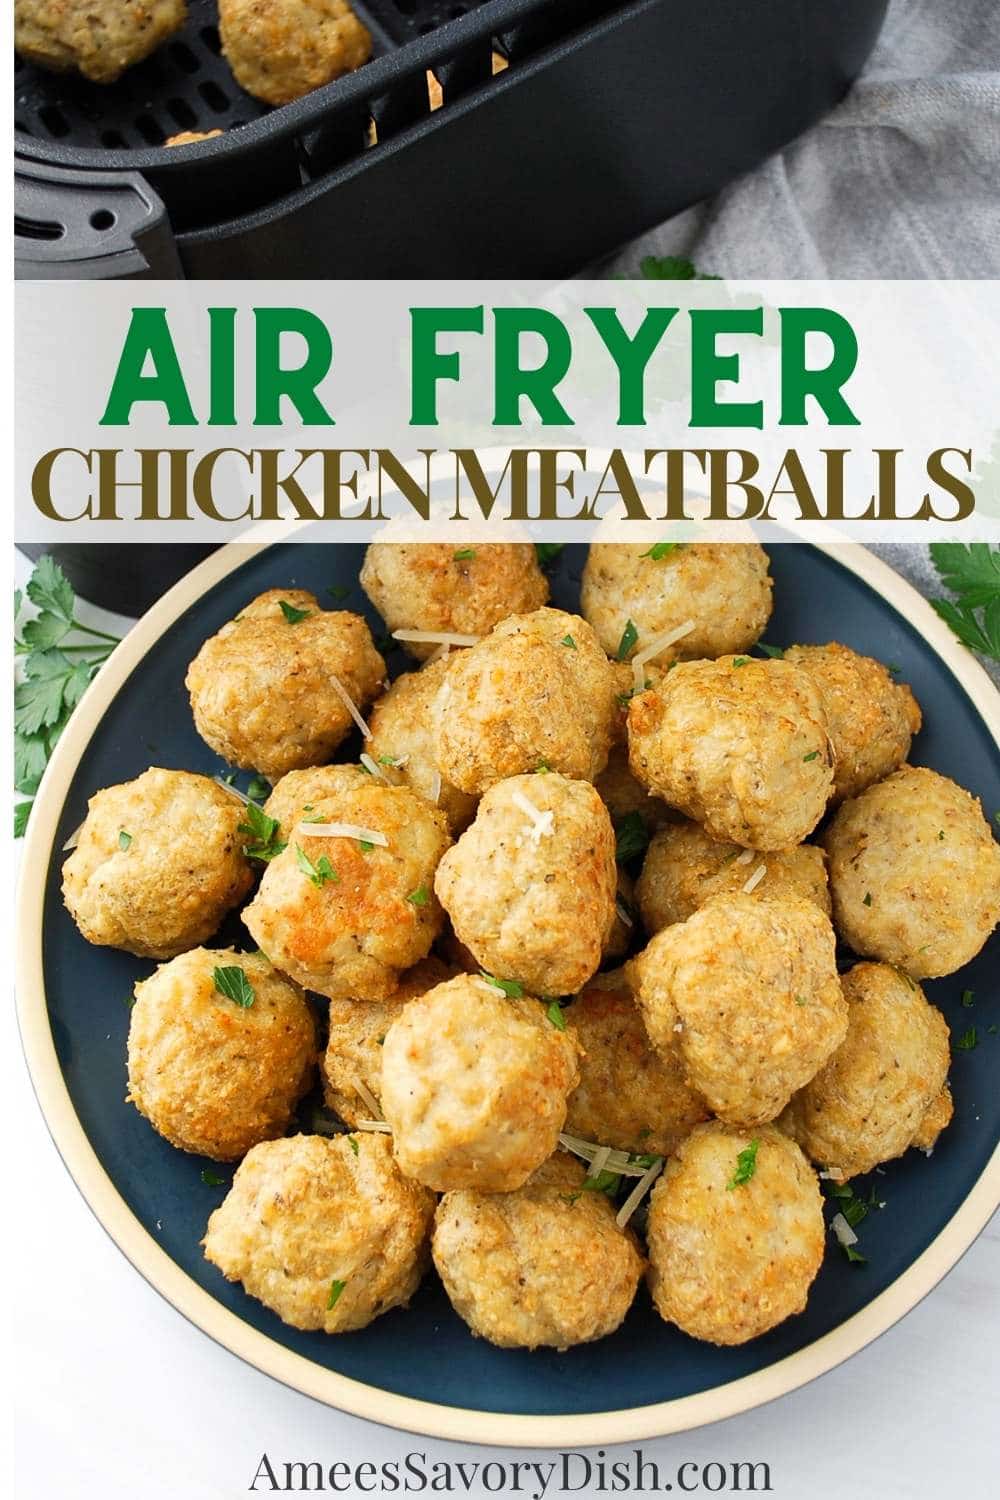 These Air Fryer Chicken Meatballs are plump, juicy, and loaded with savory Italian flavor. Made with egg whites, oat ban, flaxseed, Parmesan, and spices, these meatballs are suitable for gluten-free diets. via @Ameessavorydish